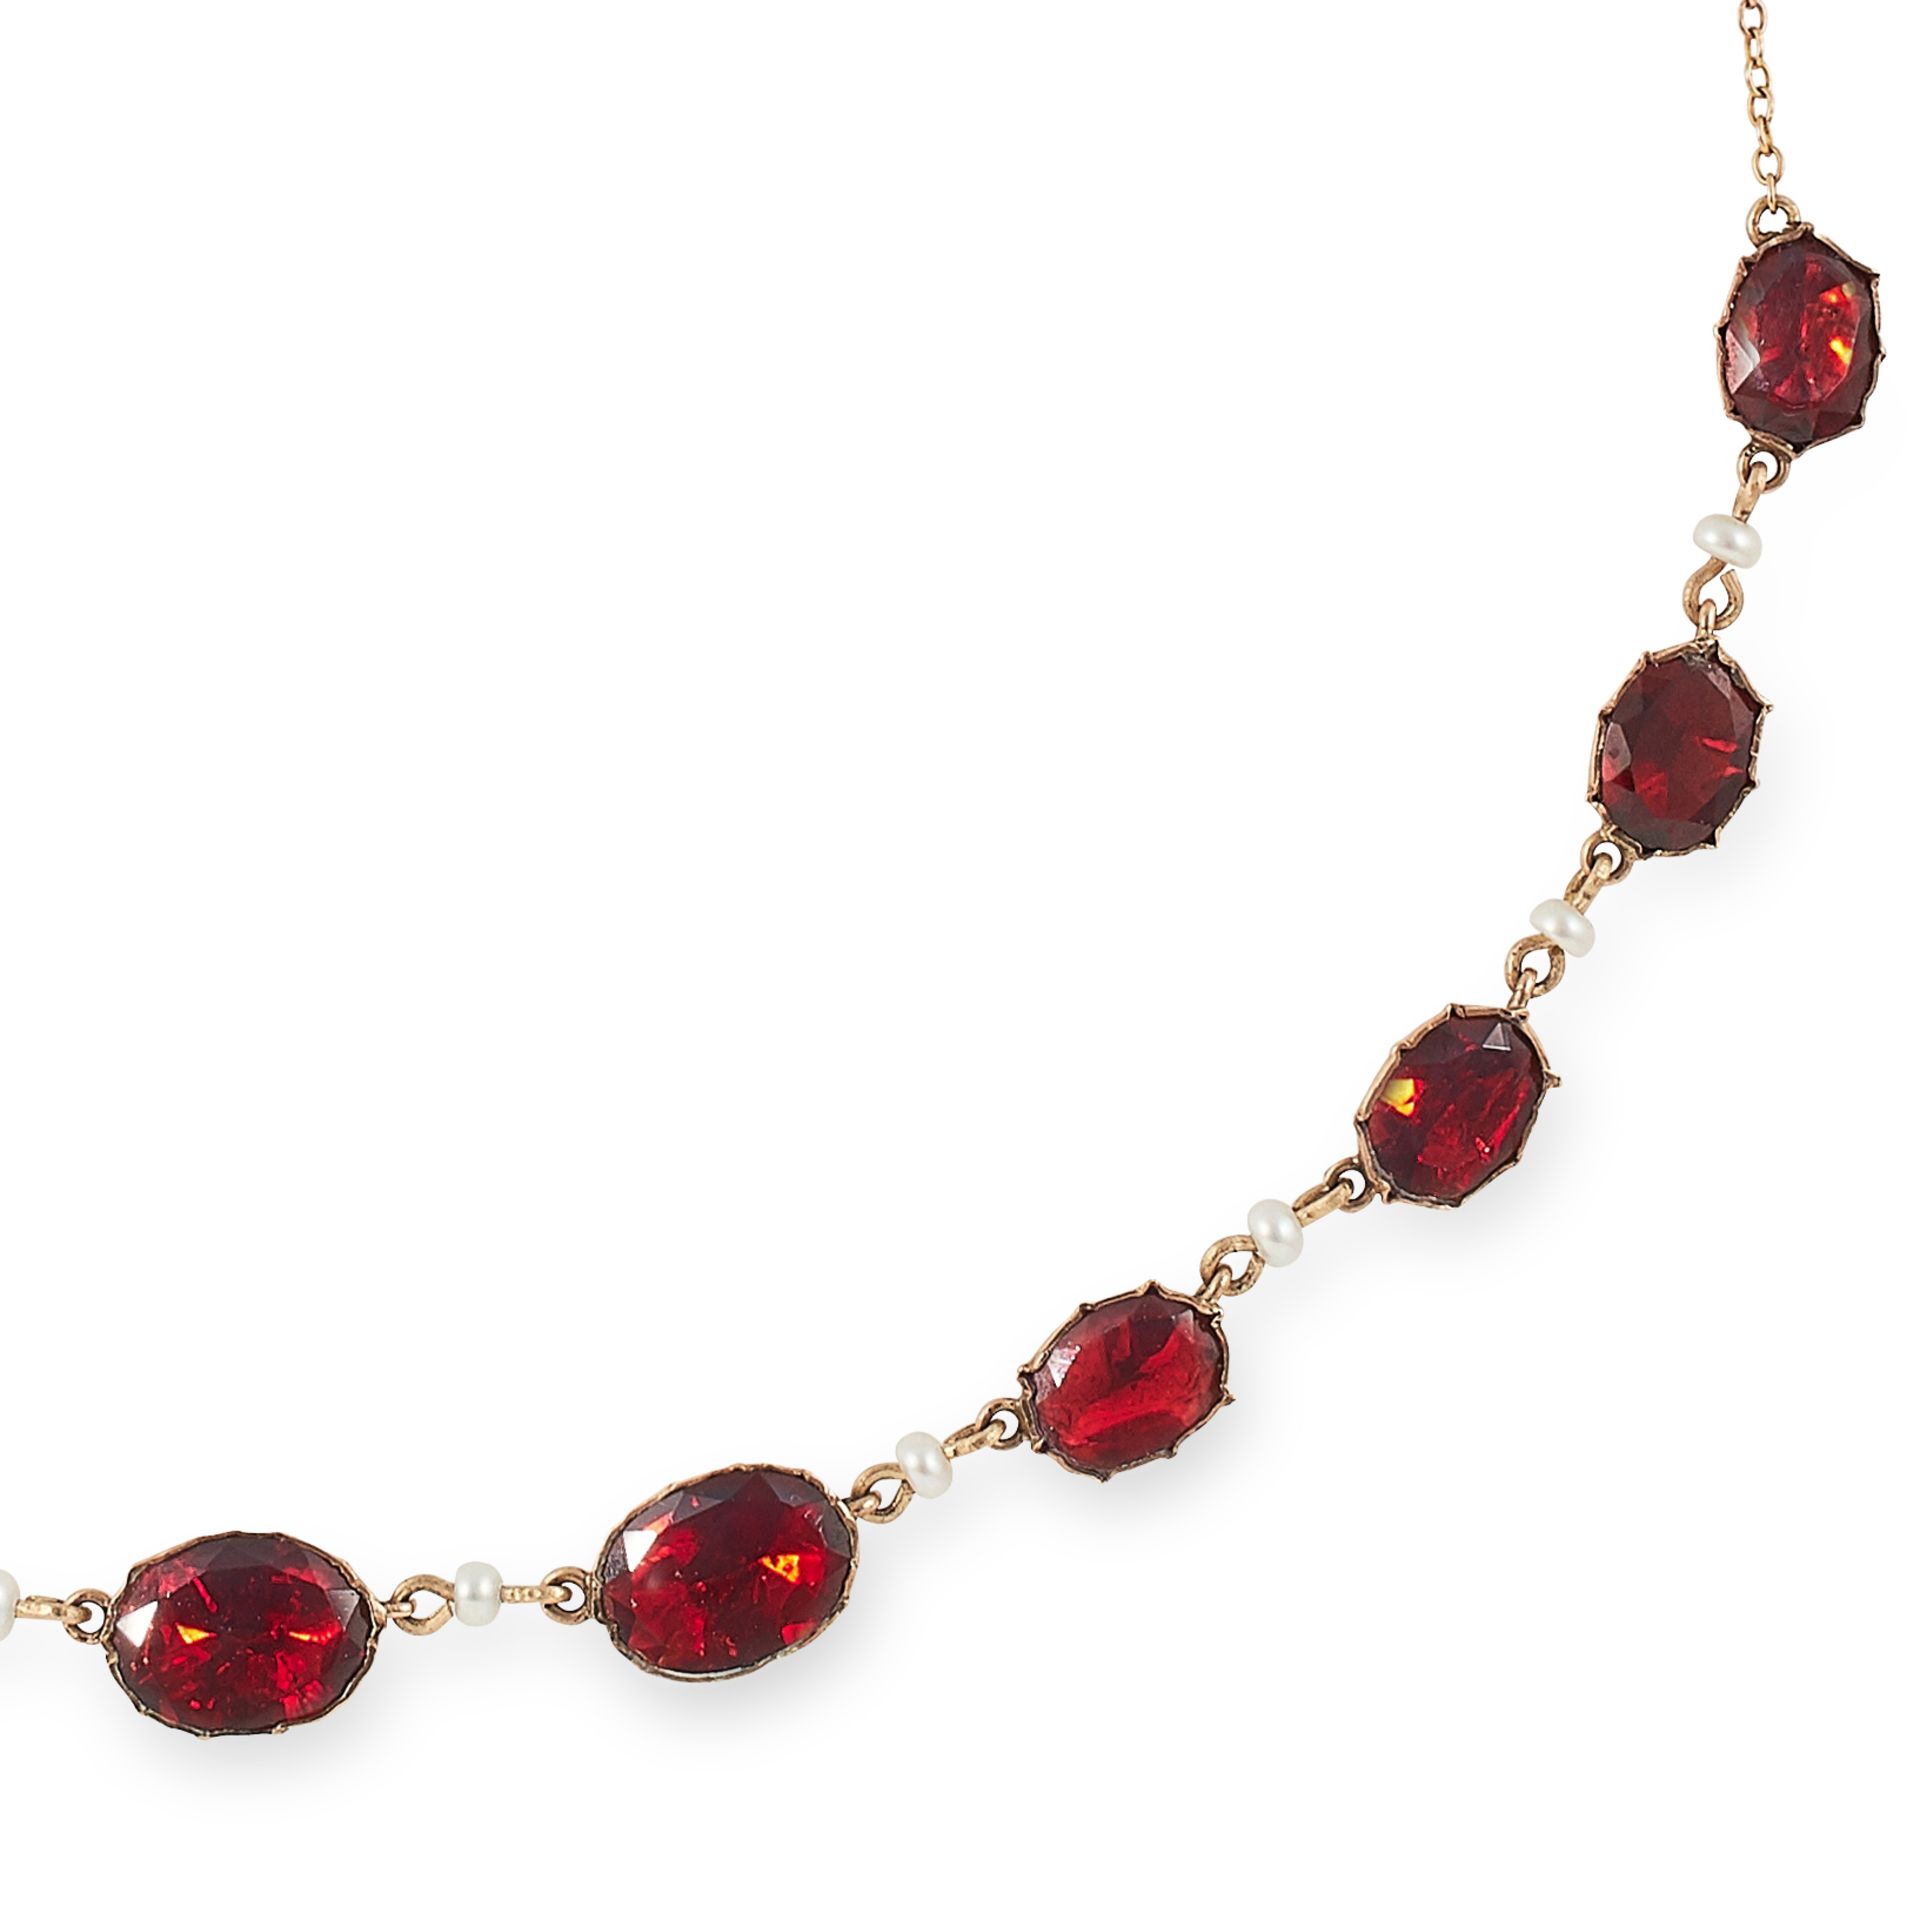 ANTIQUE GARNET AND SEED PEARL NECKLACE set with oval cut garnets and seed pearls, 43cm, 7g. - Bild 2 aus 2